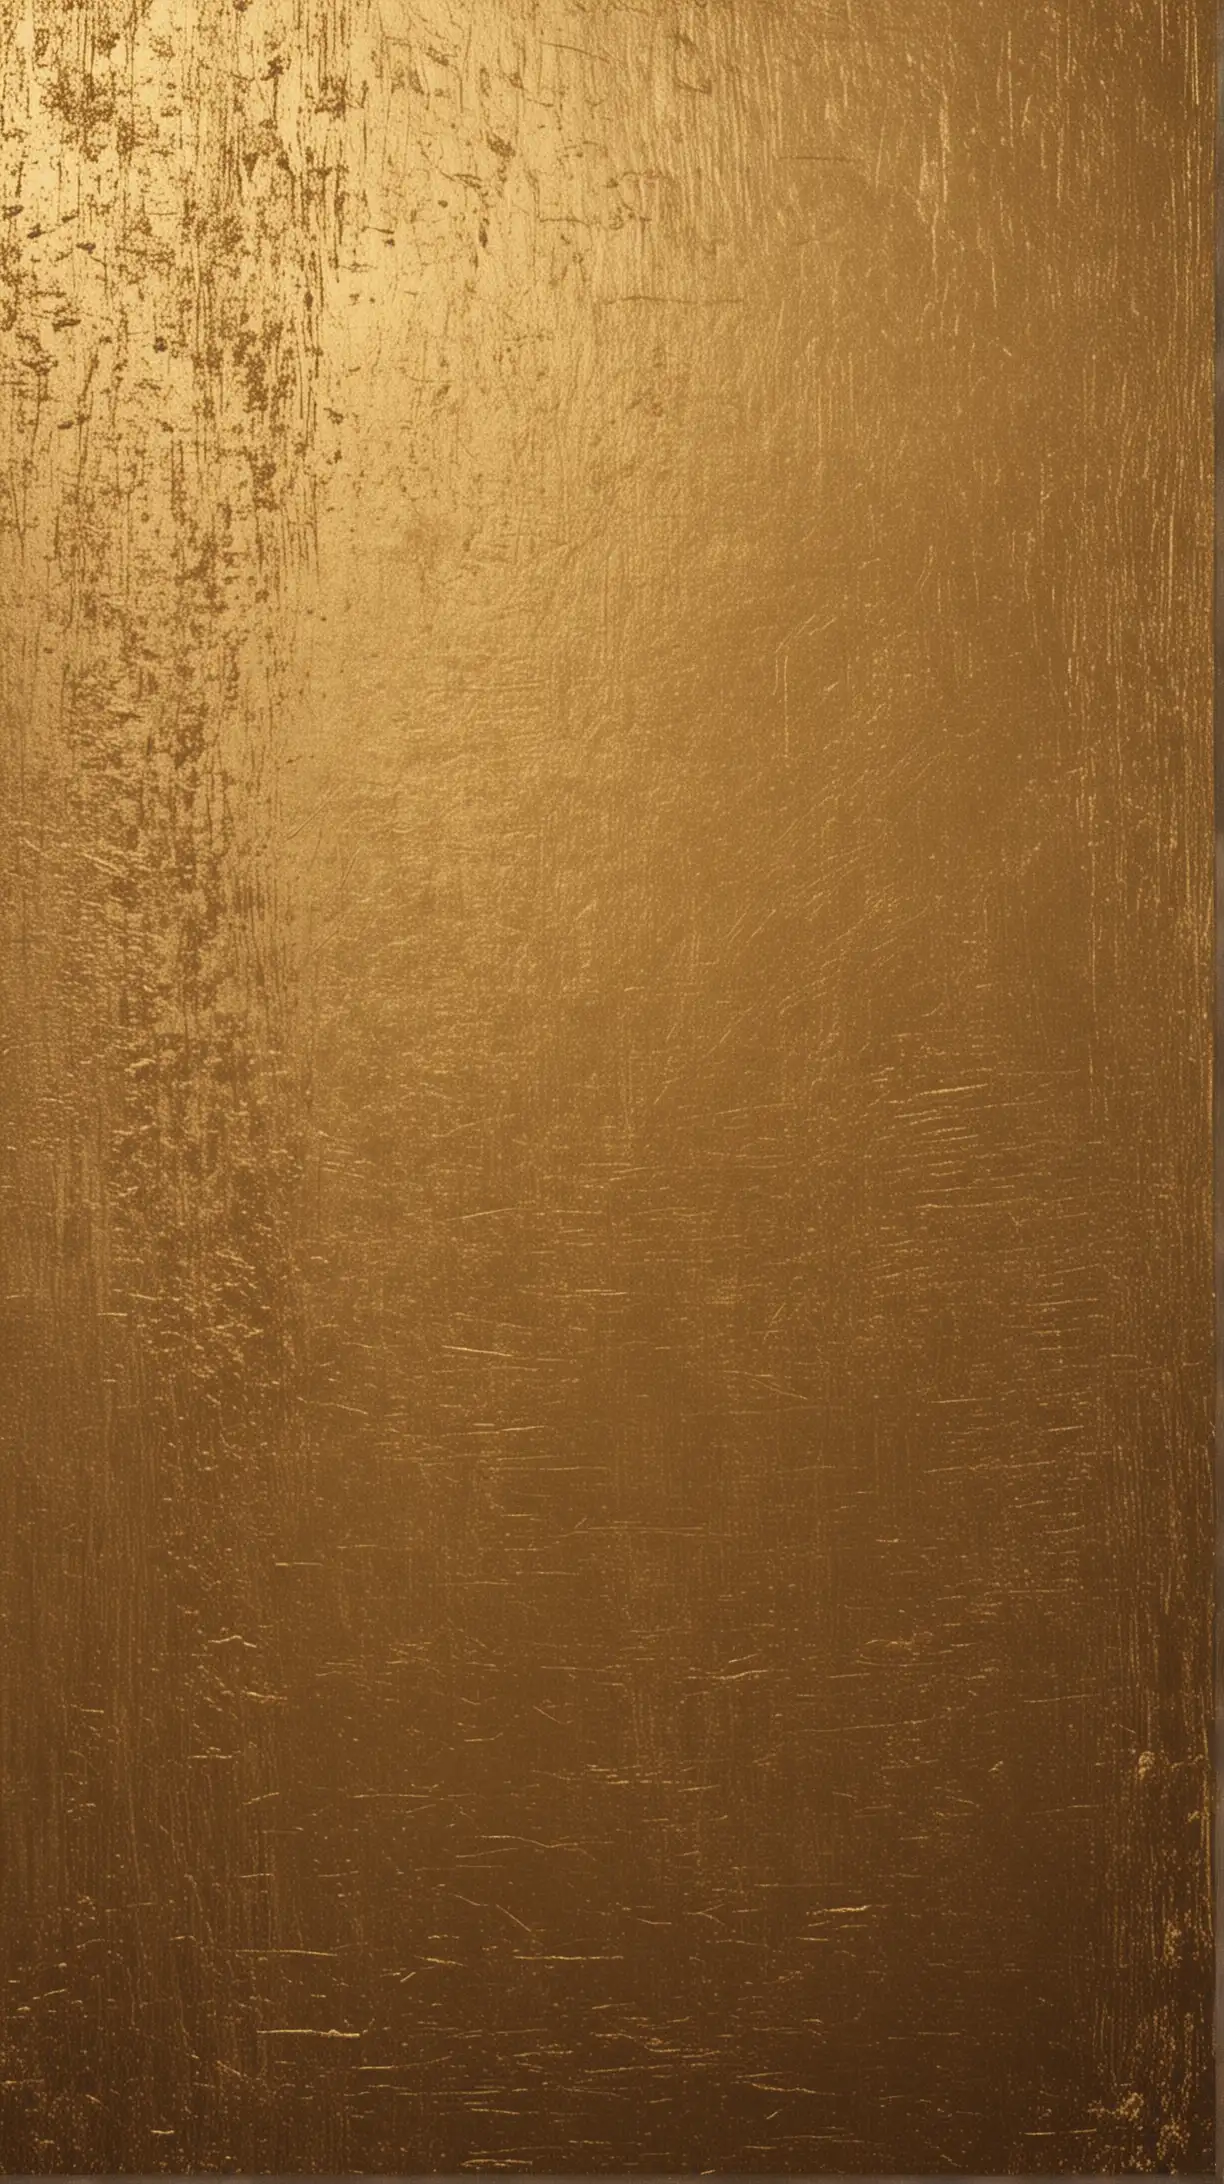 artistic fine art style textures with  gold color metallic textured monochrome background with slightly darker edges